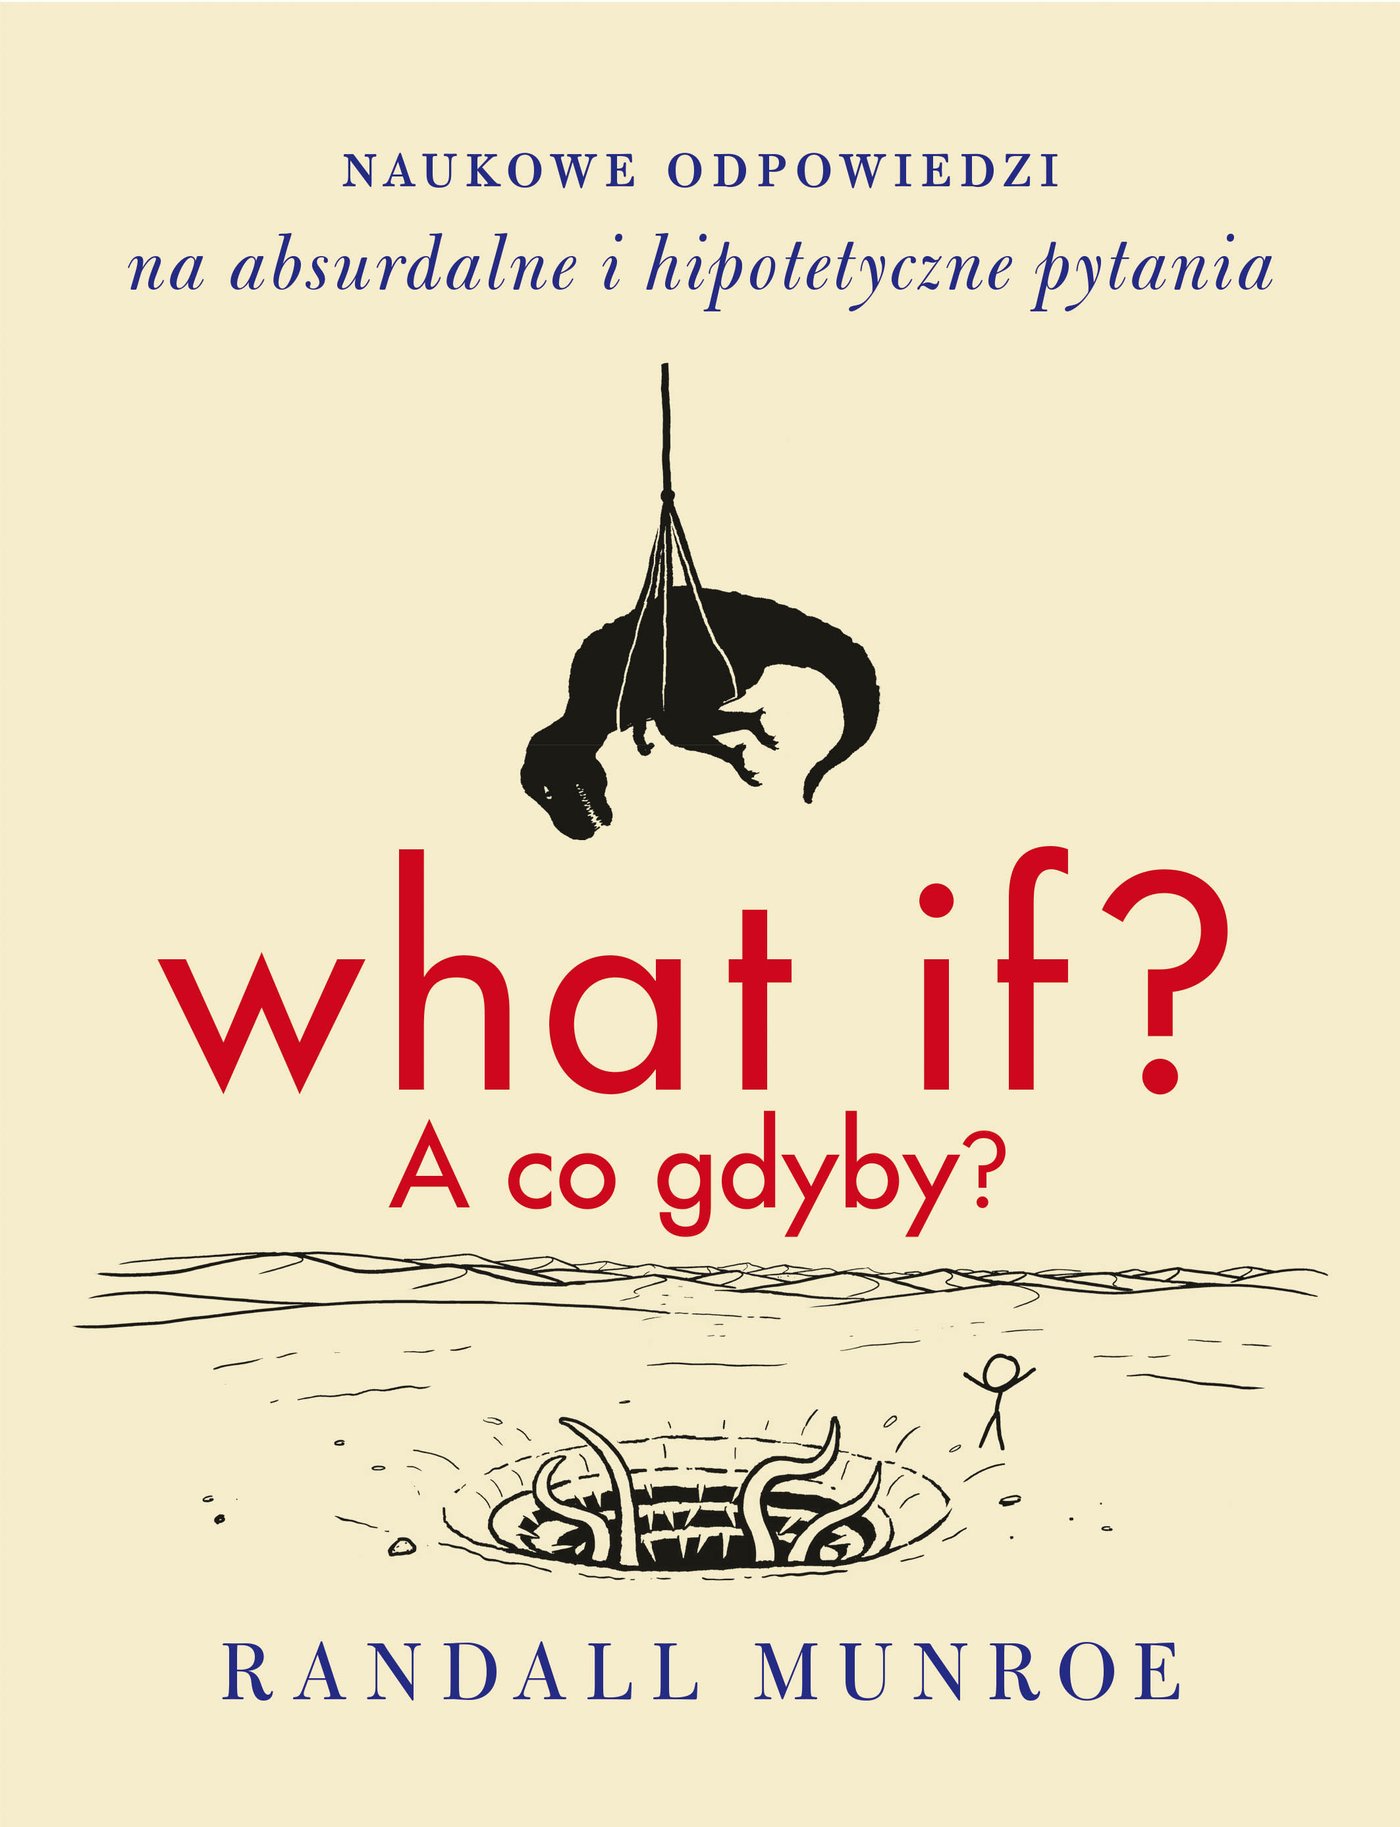 What if? A co gdyby? Randall Munroe ebook virtualo.pl